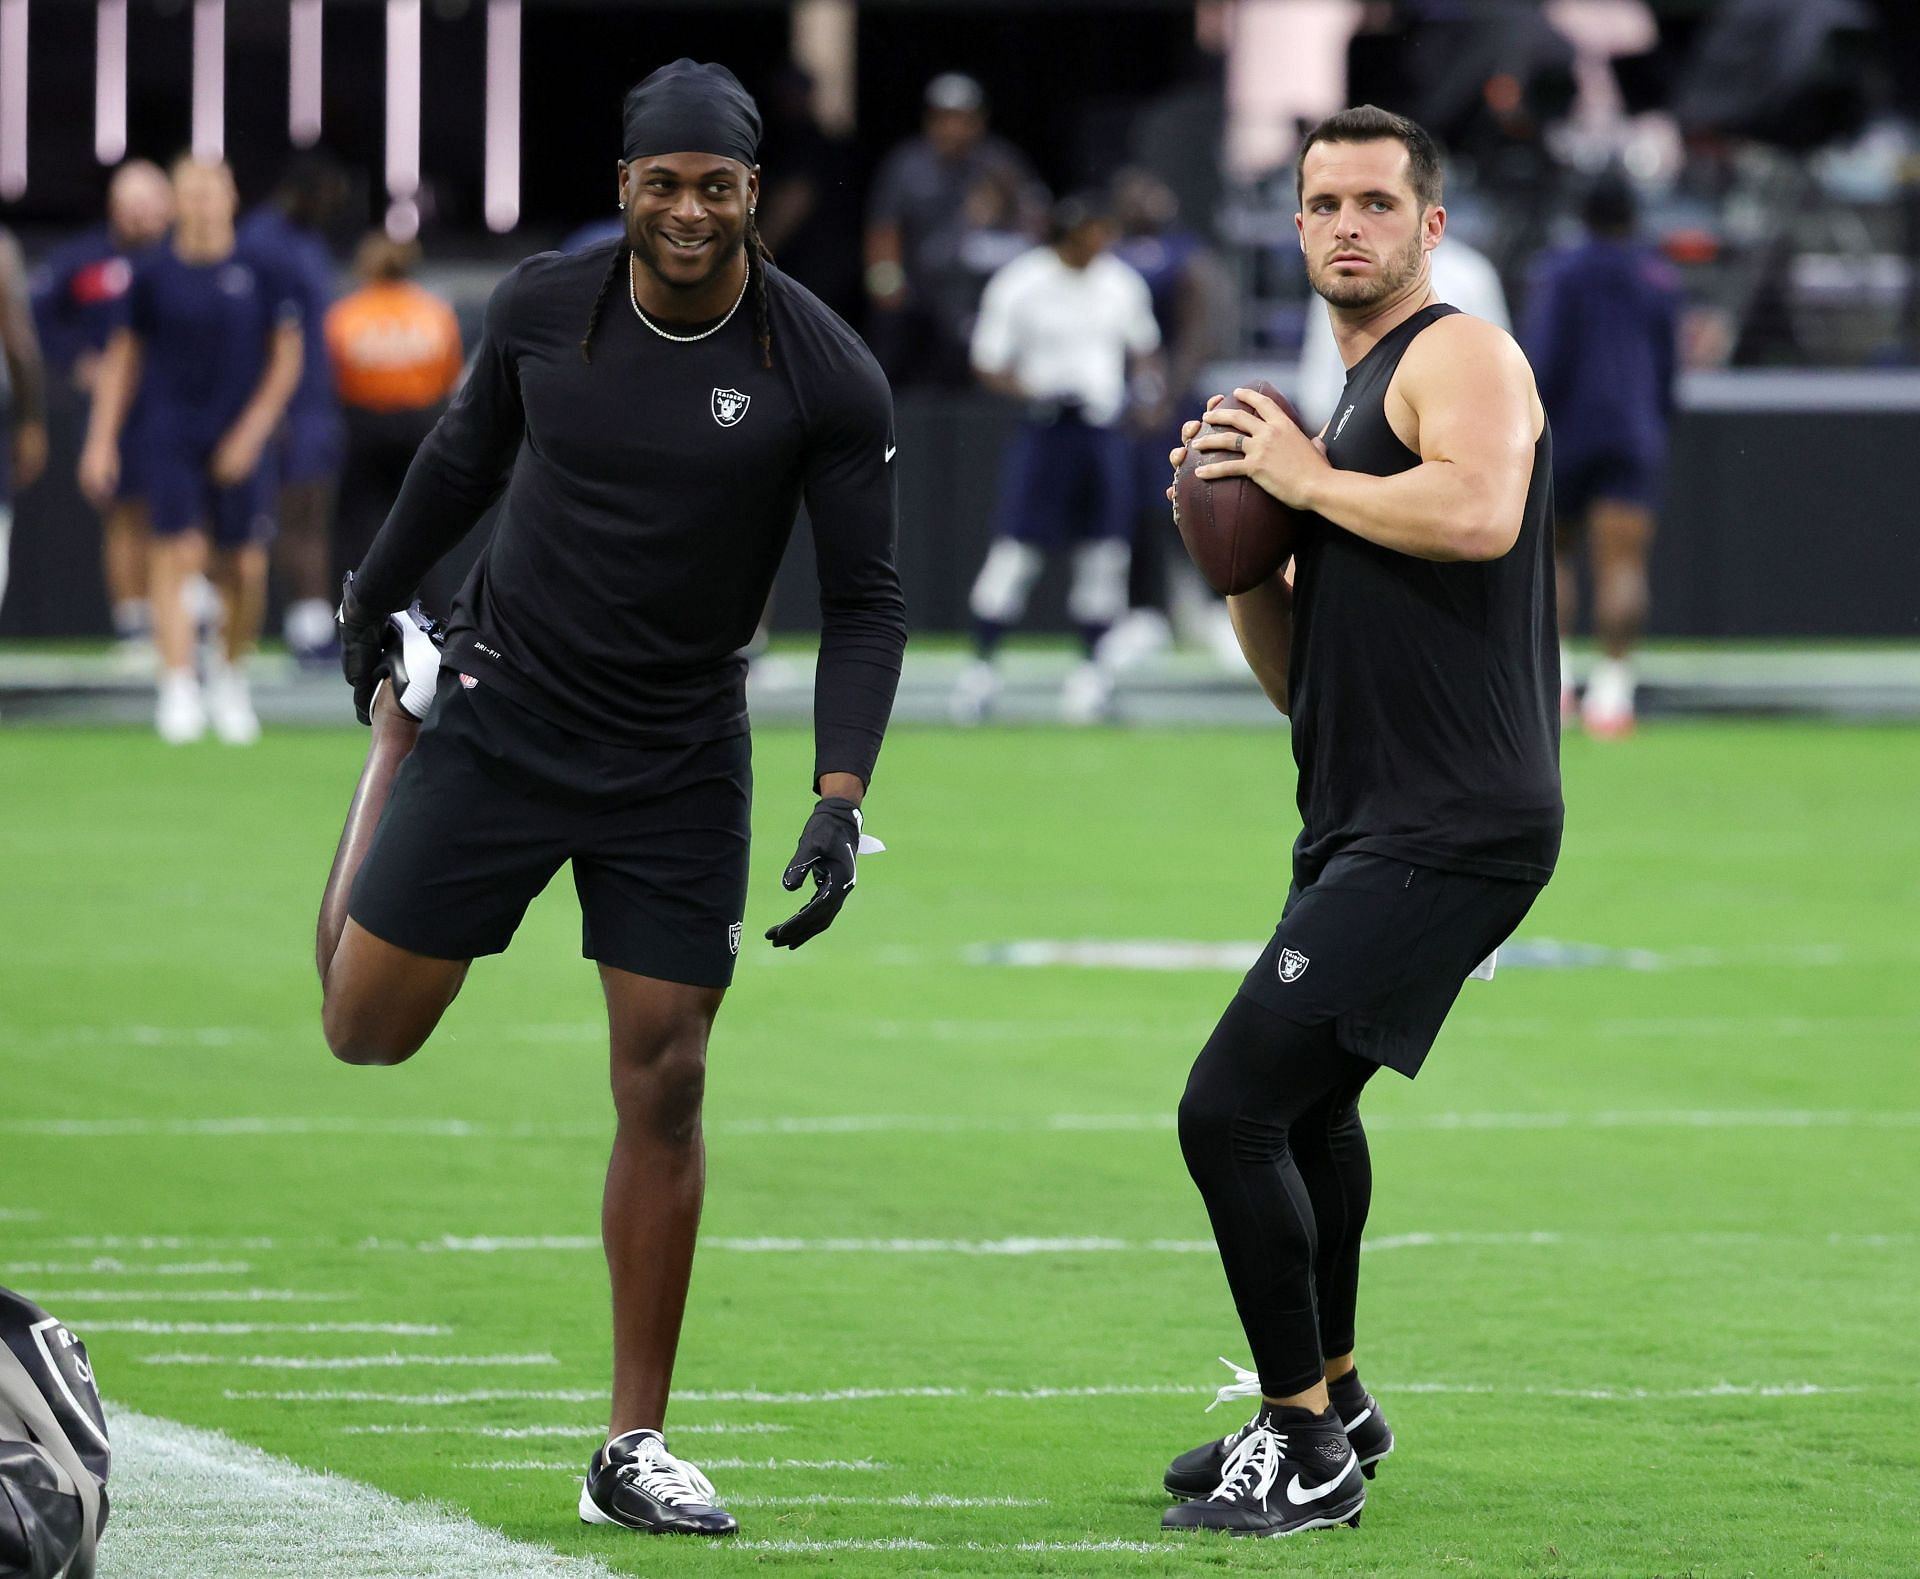 Davante Adams will have to team up with Derek Carr in the upcoming season